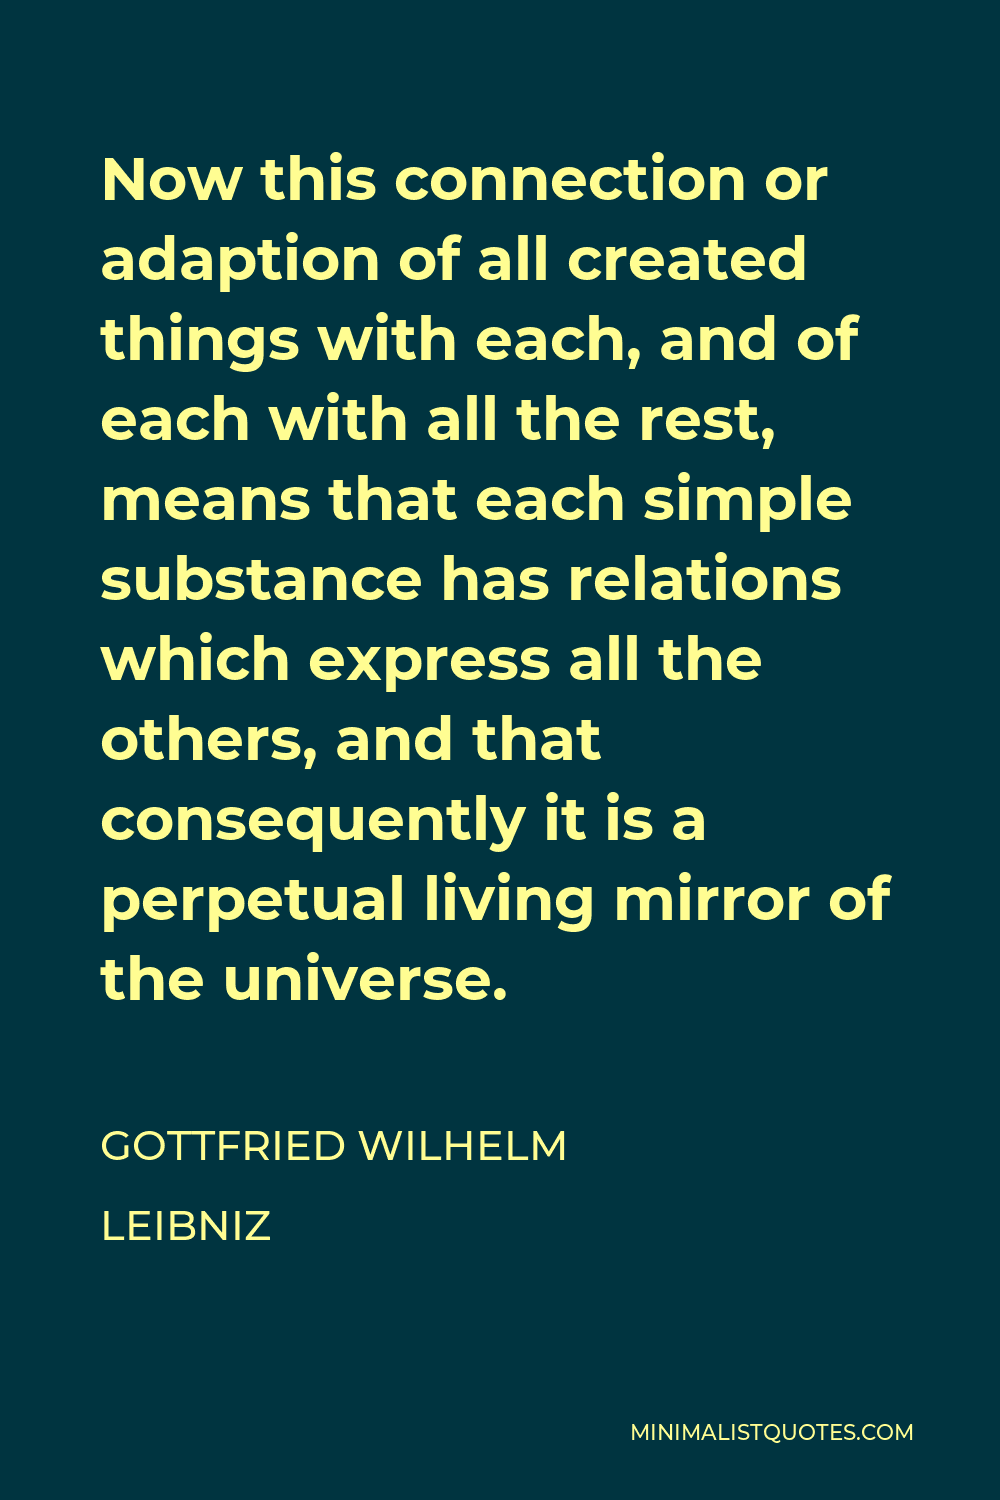 Gottfried Wilhelm Leibniz Quote - Now this connection or adaption of all created things with each, and of each with all the rest, means that each simple substance has relations which express all the others, and that consequently it is a perpetual living mirror of the universe.